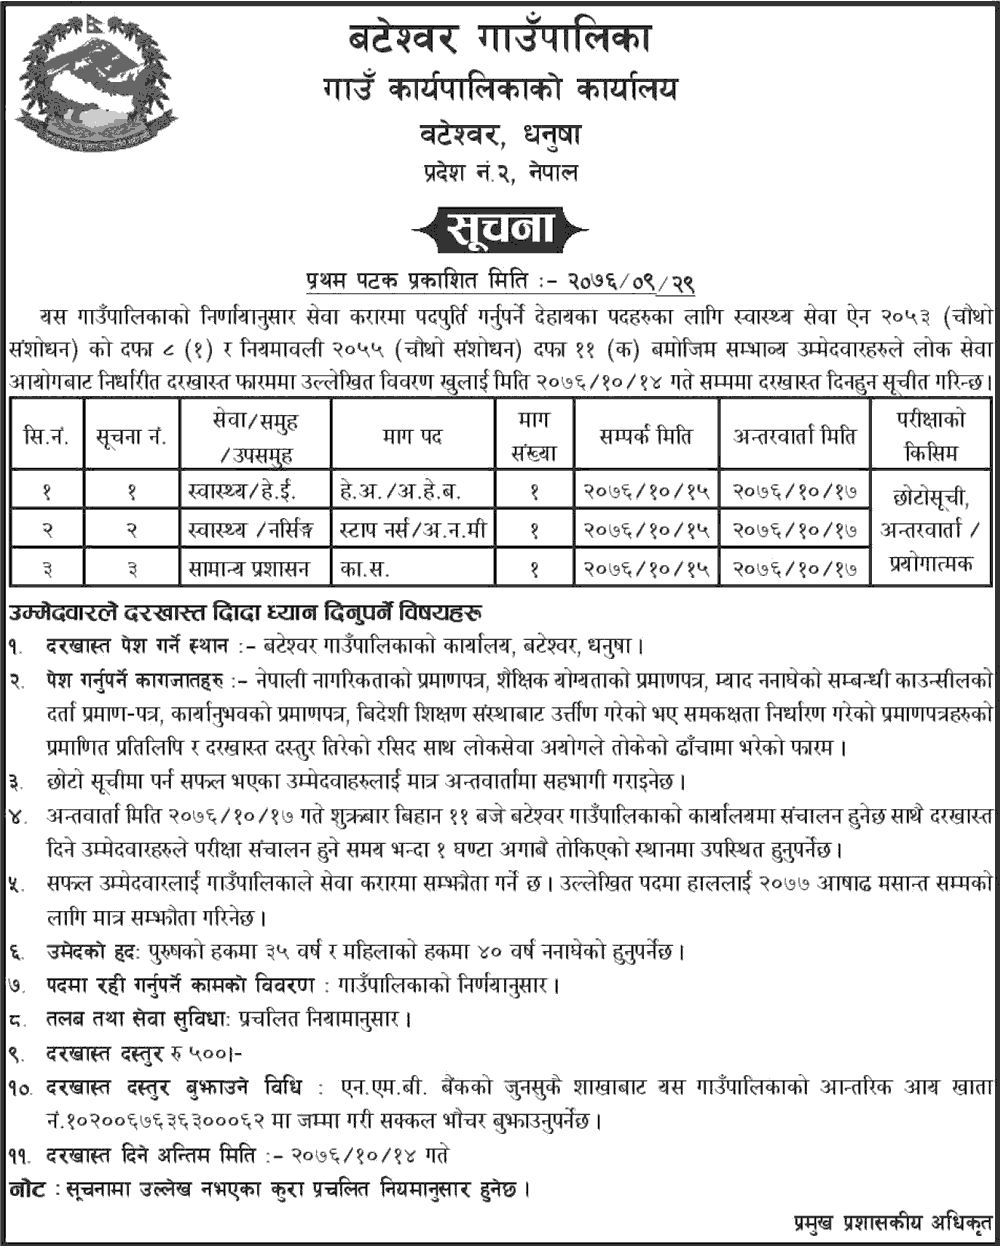 Bateshwor Rural Municipality Vacancy for Health Services